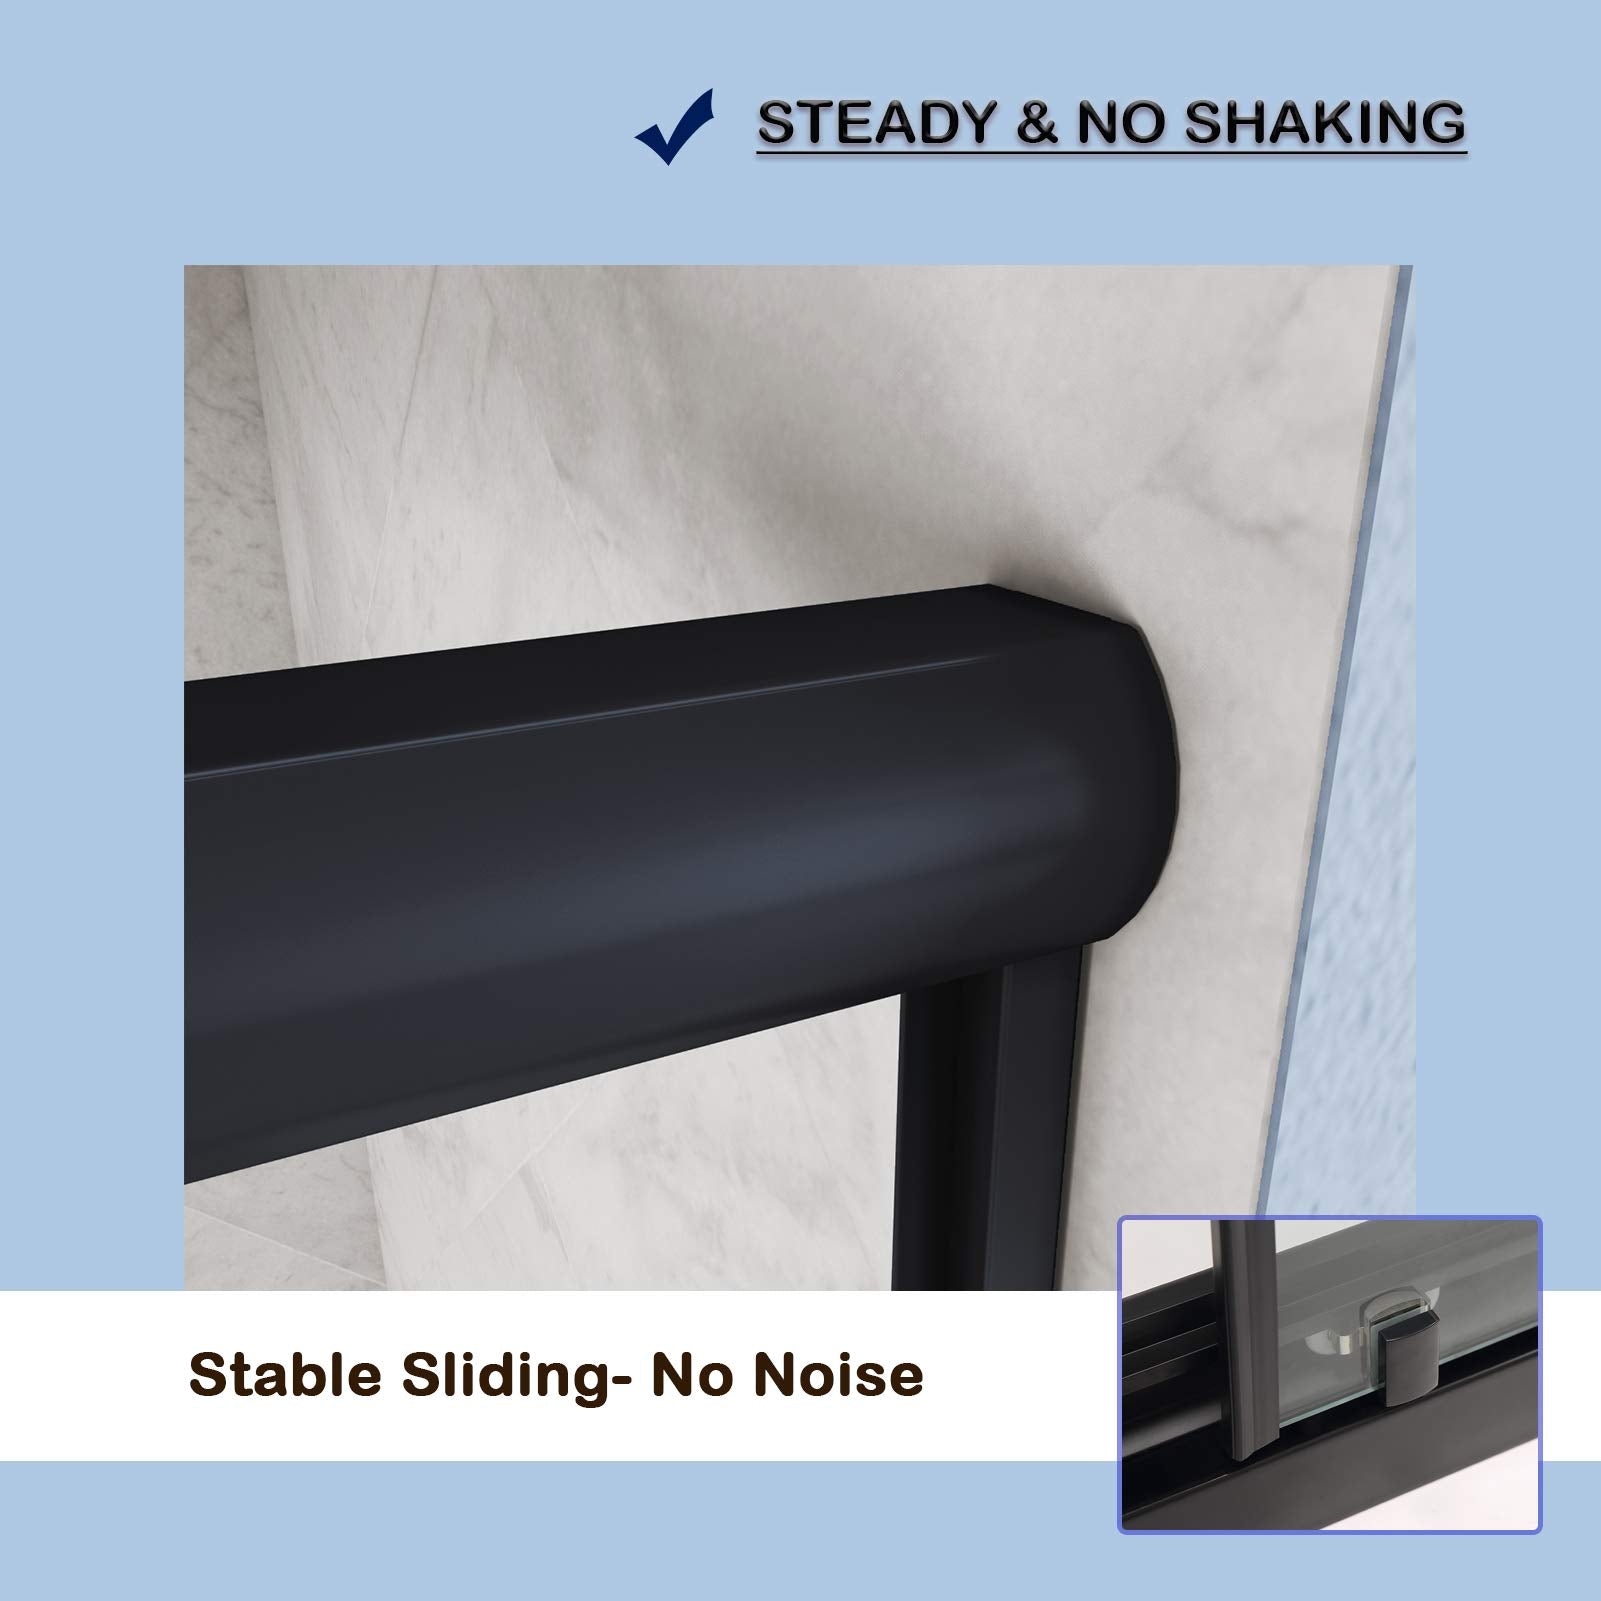 steady & no shaking, stable sliding-no noise